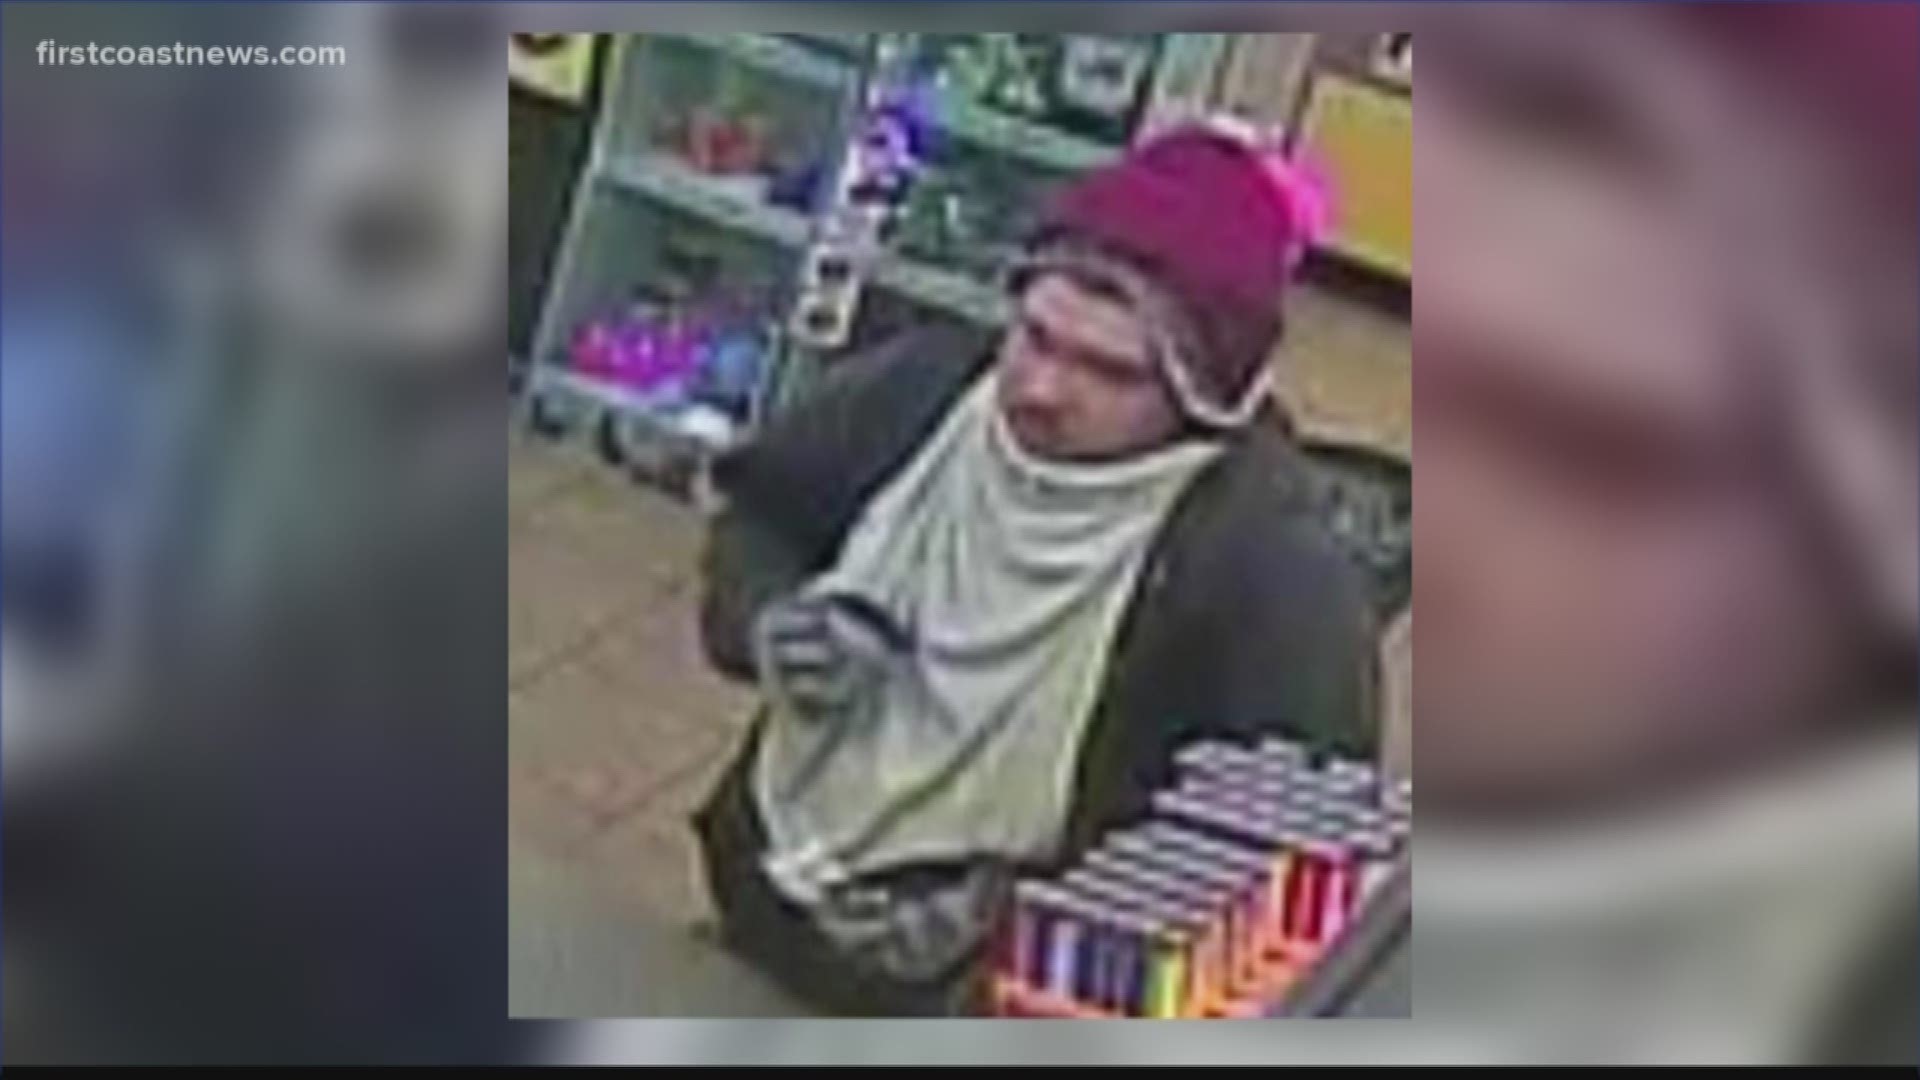 Deputies say the man entered the Circle K gas station on 465 SR-16 and lurked around for about 30 minutes before brandishing a gun and demanding money from the cash register.